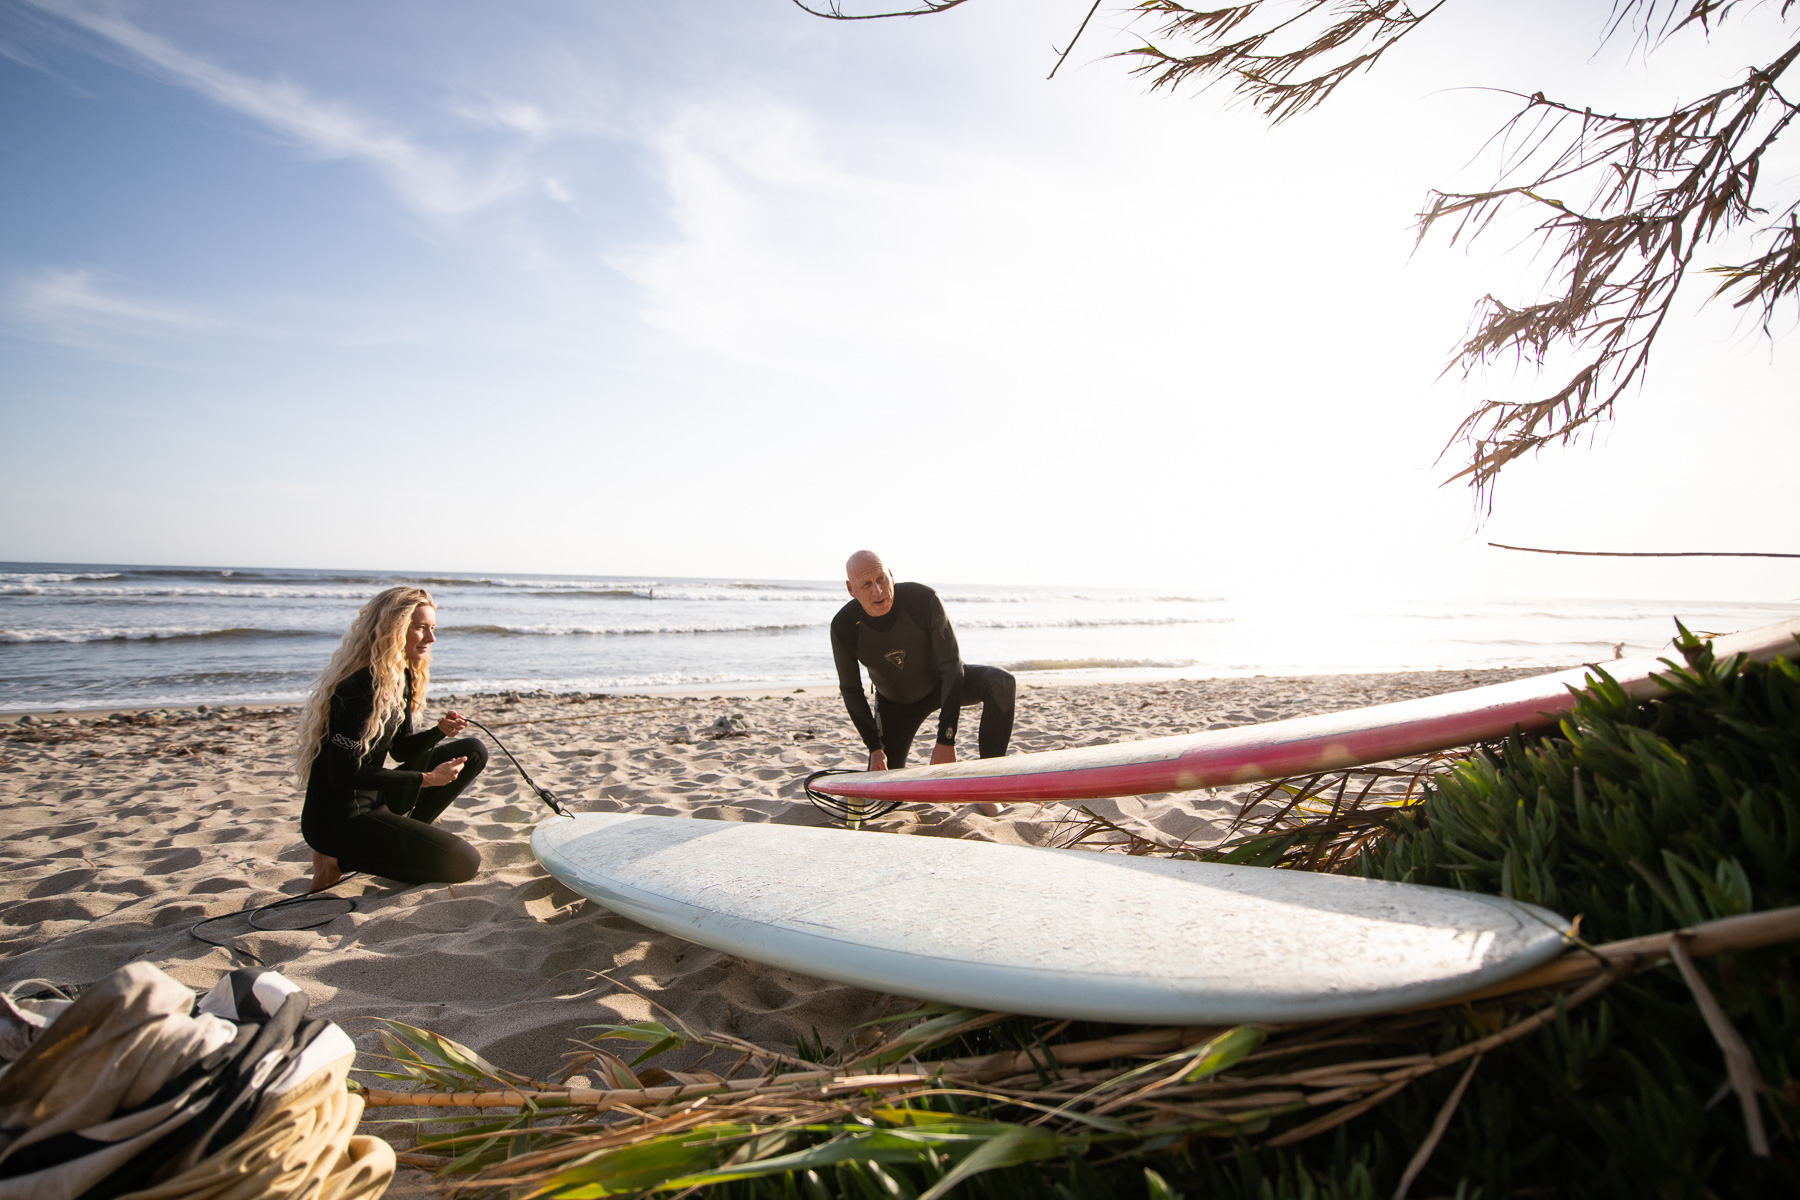 Father and daughter in law with longboard surfboards